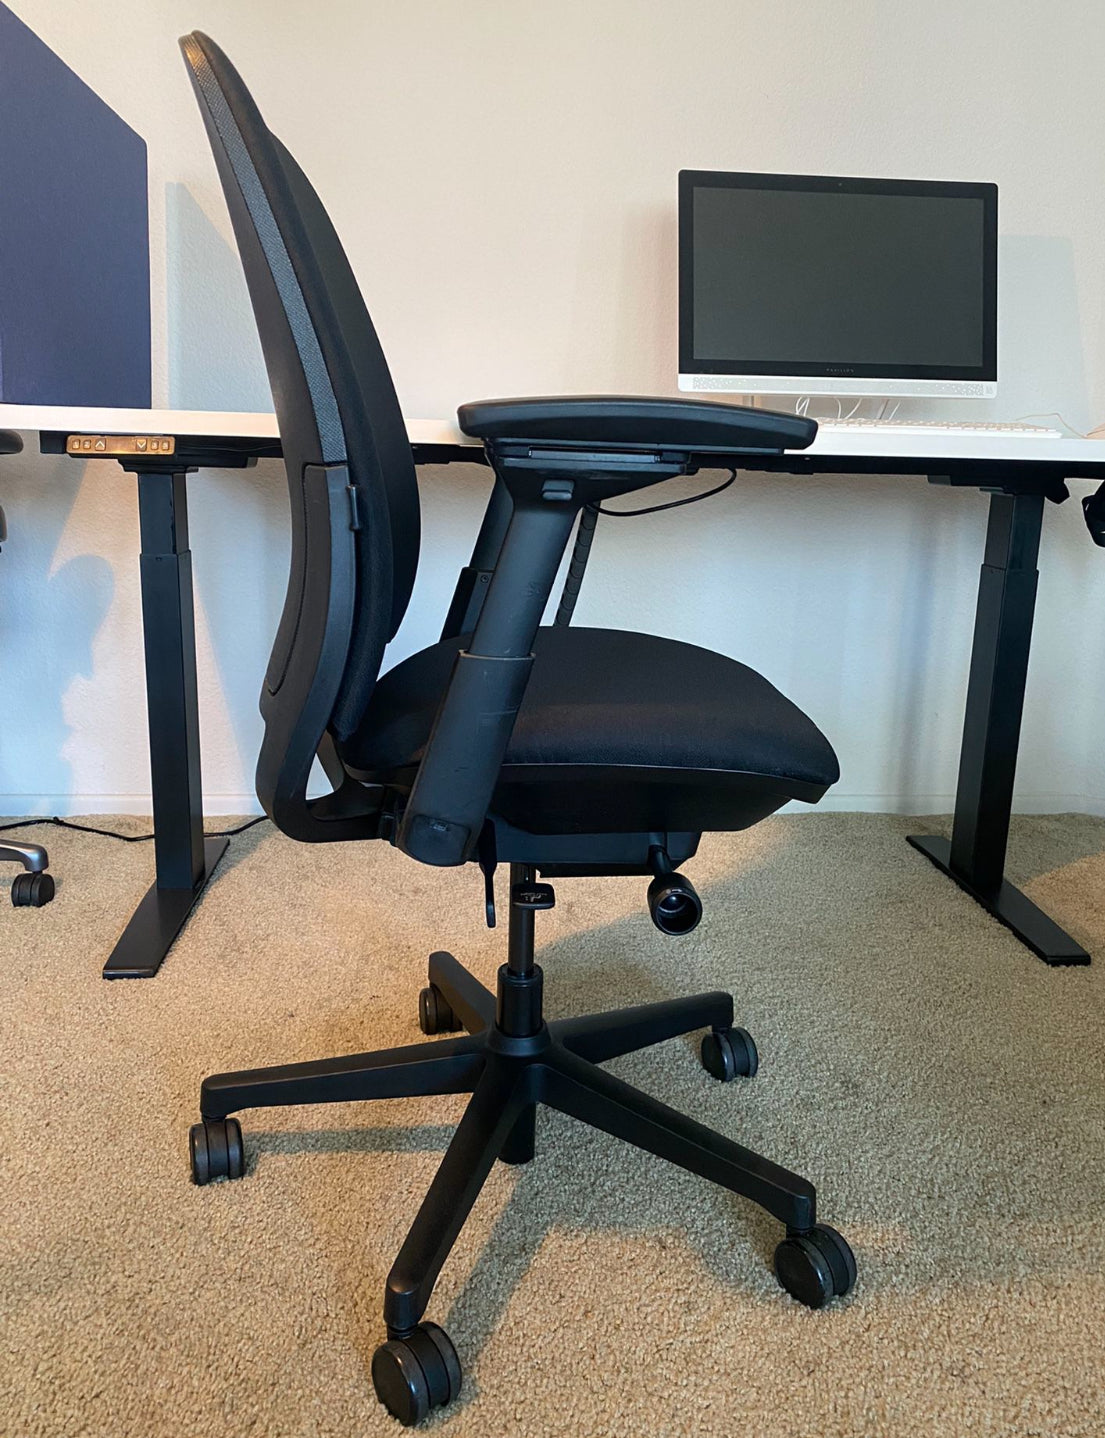 Steelcase Amia pre owned fully adjustable model in black